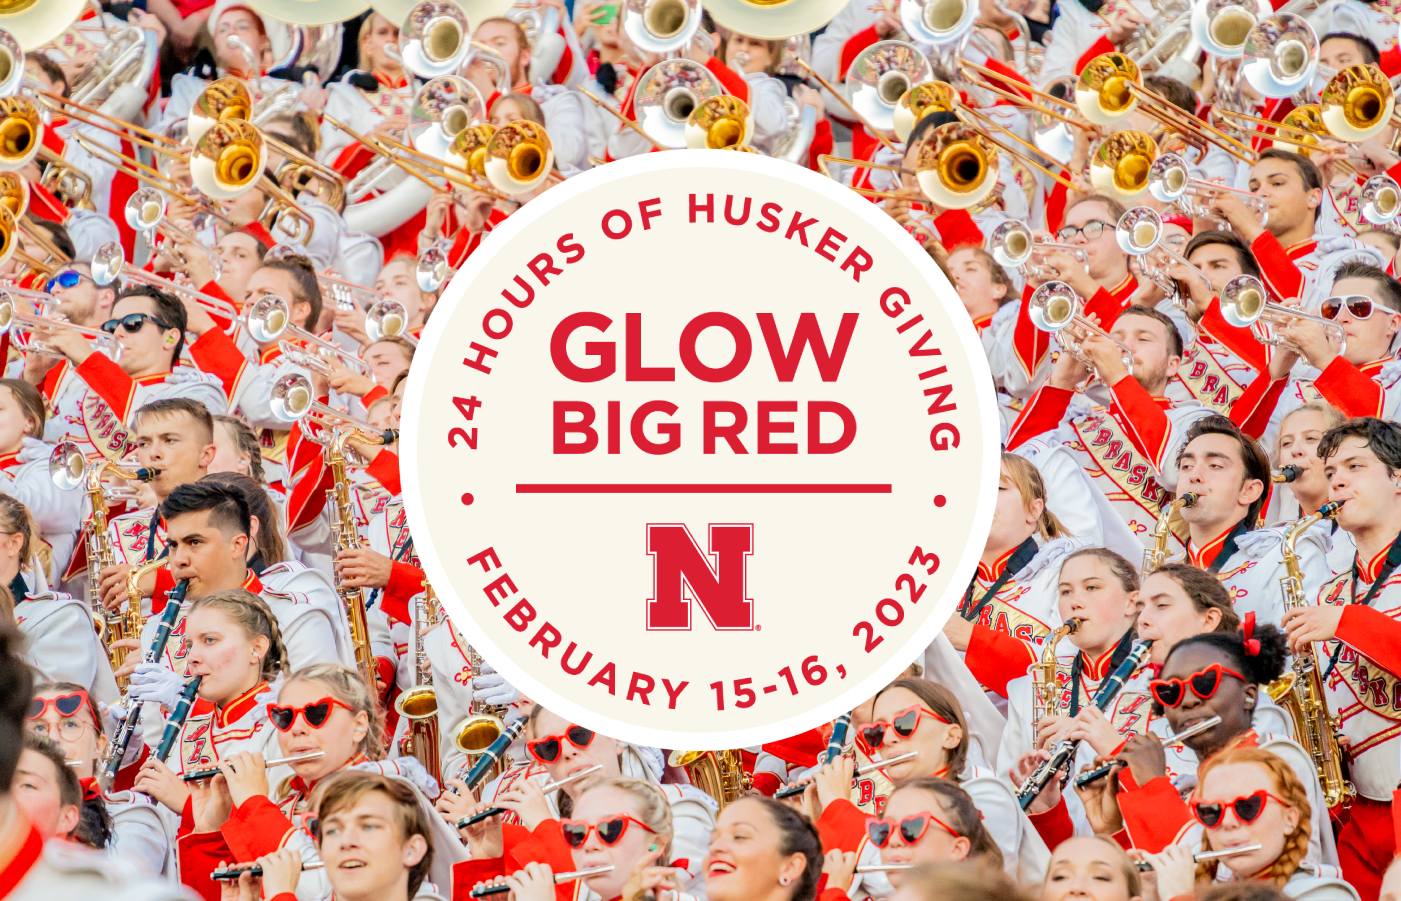 Glow Big Red—24 Hours of Husker Giving—is Feb. 15-16.